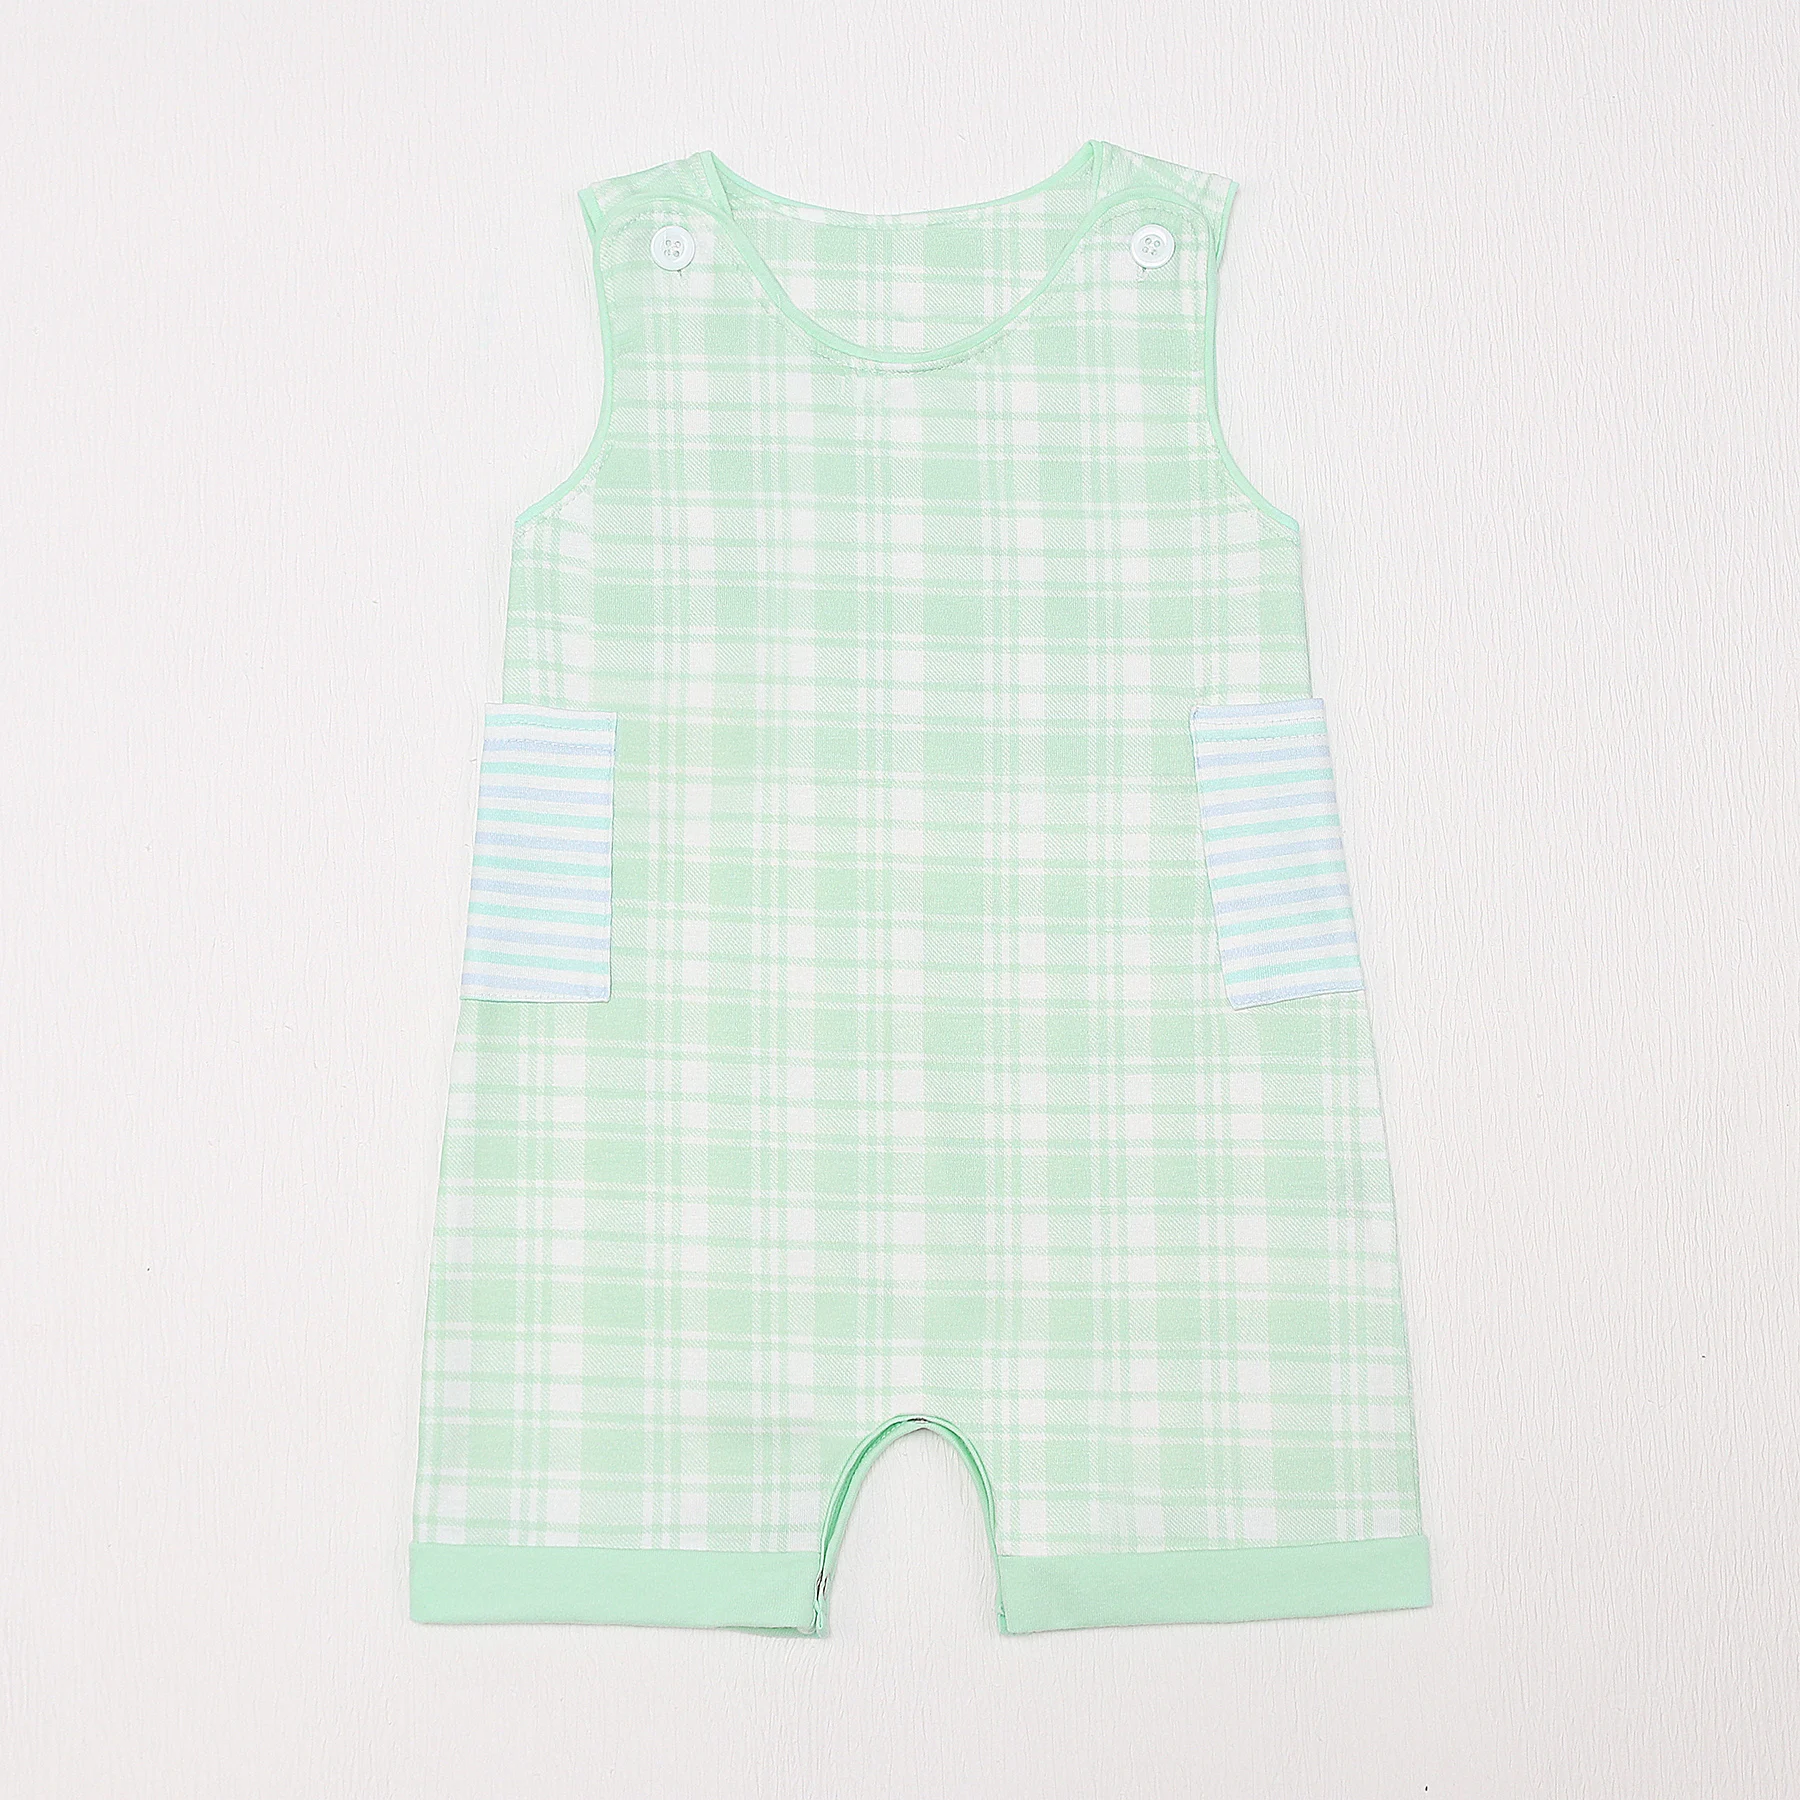 

New Born 0-3T Jumpsuit Mother Kids Romper Baby Boys Bubble Green Lattices Clothes Bebes Outfit Infant Shorts Pocket Casual Wear